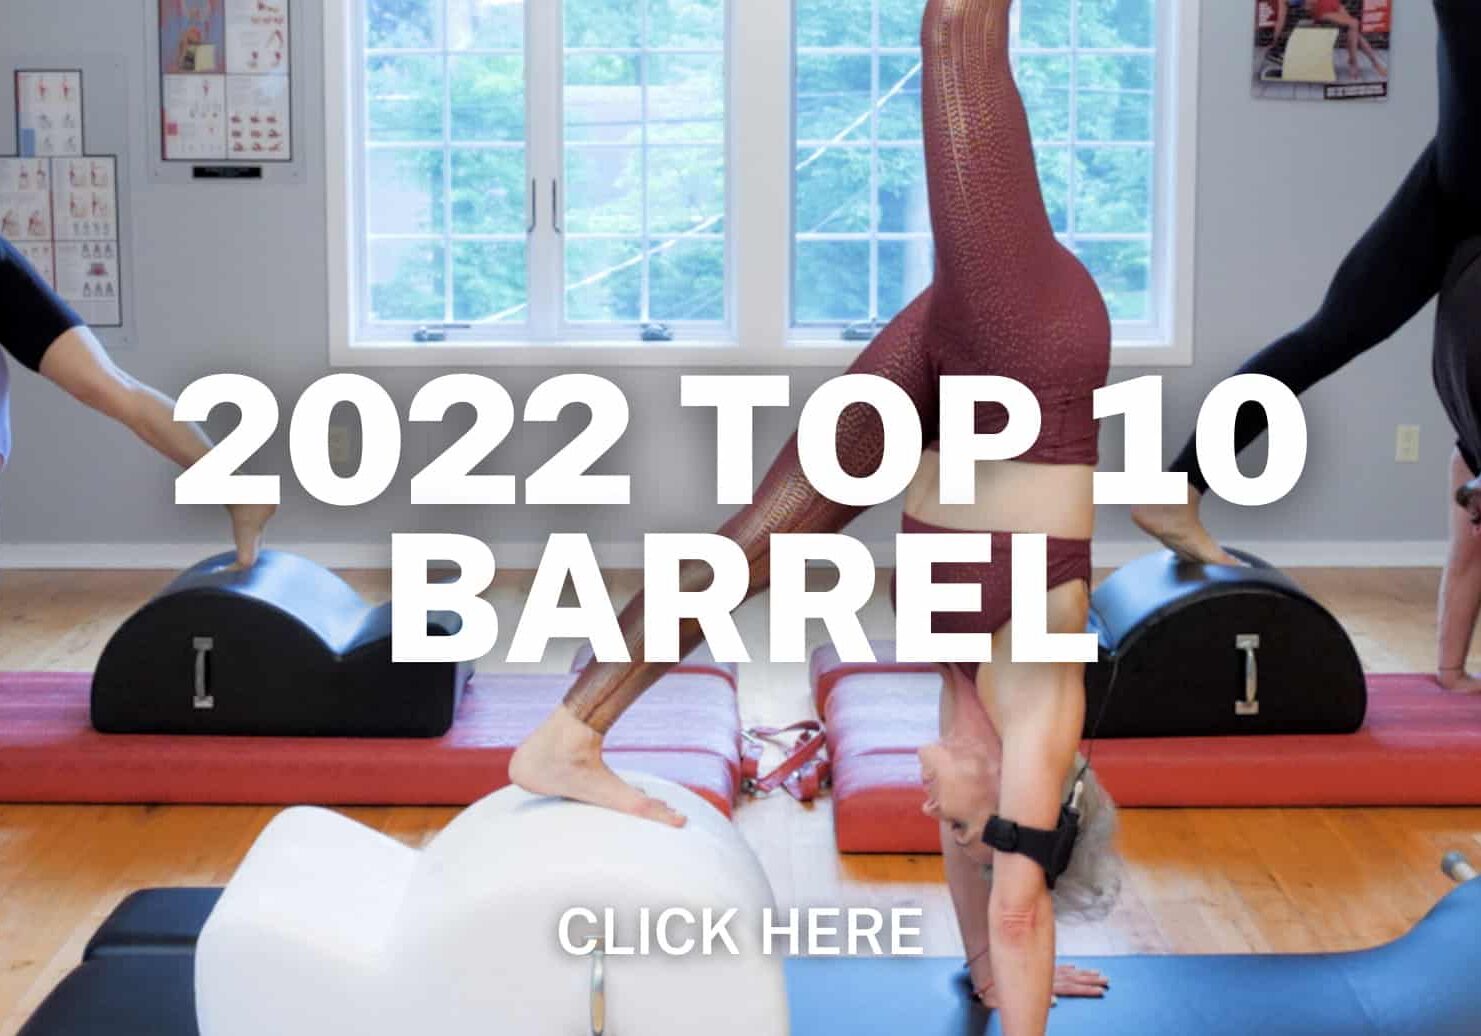 Click here for 2022 top 10 barrel workouts playlist